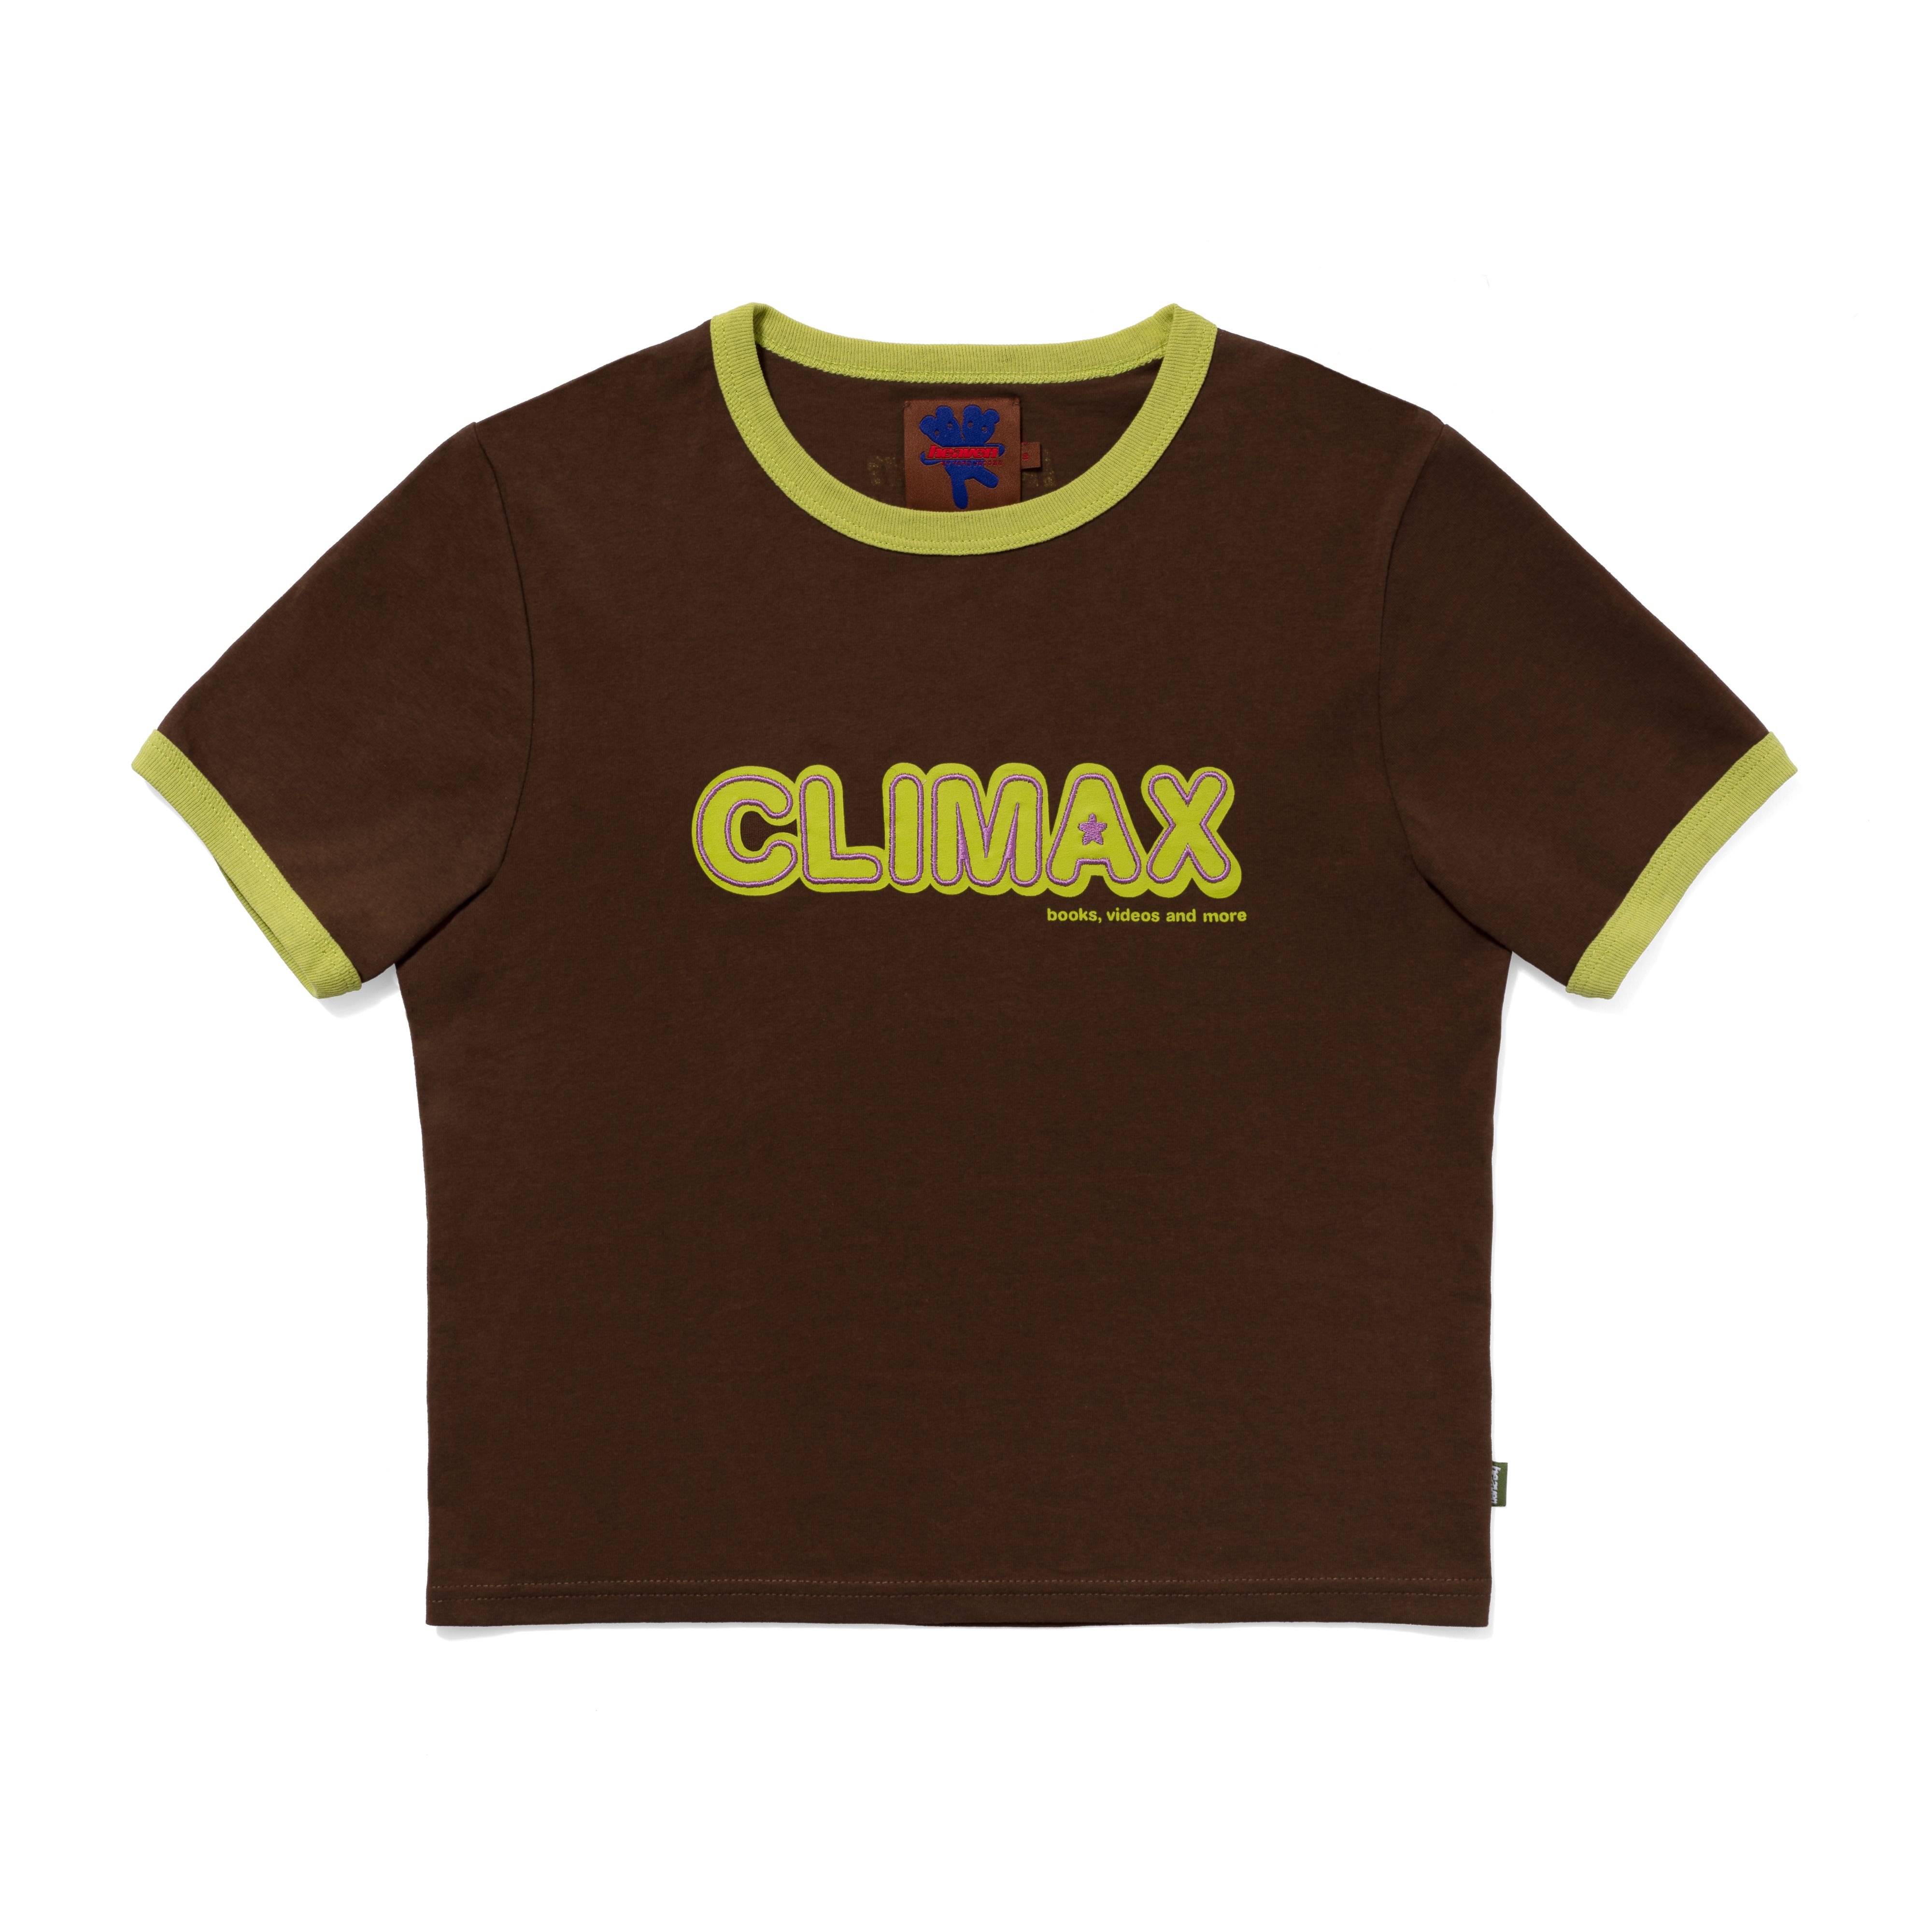 Heaven by Marc Jacobs: Climax Tee